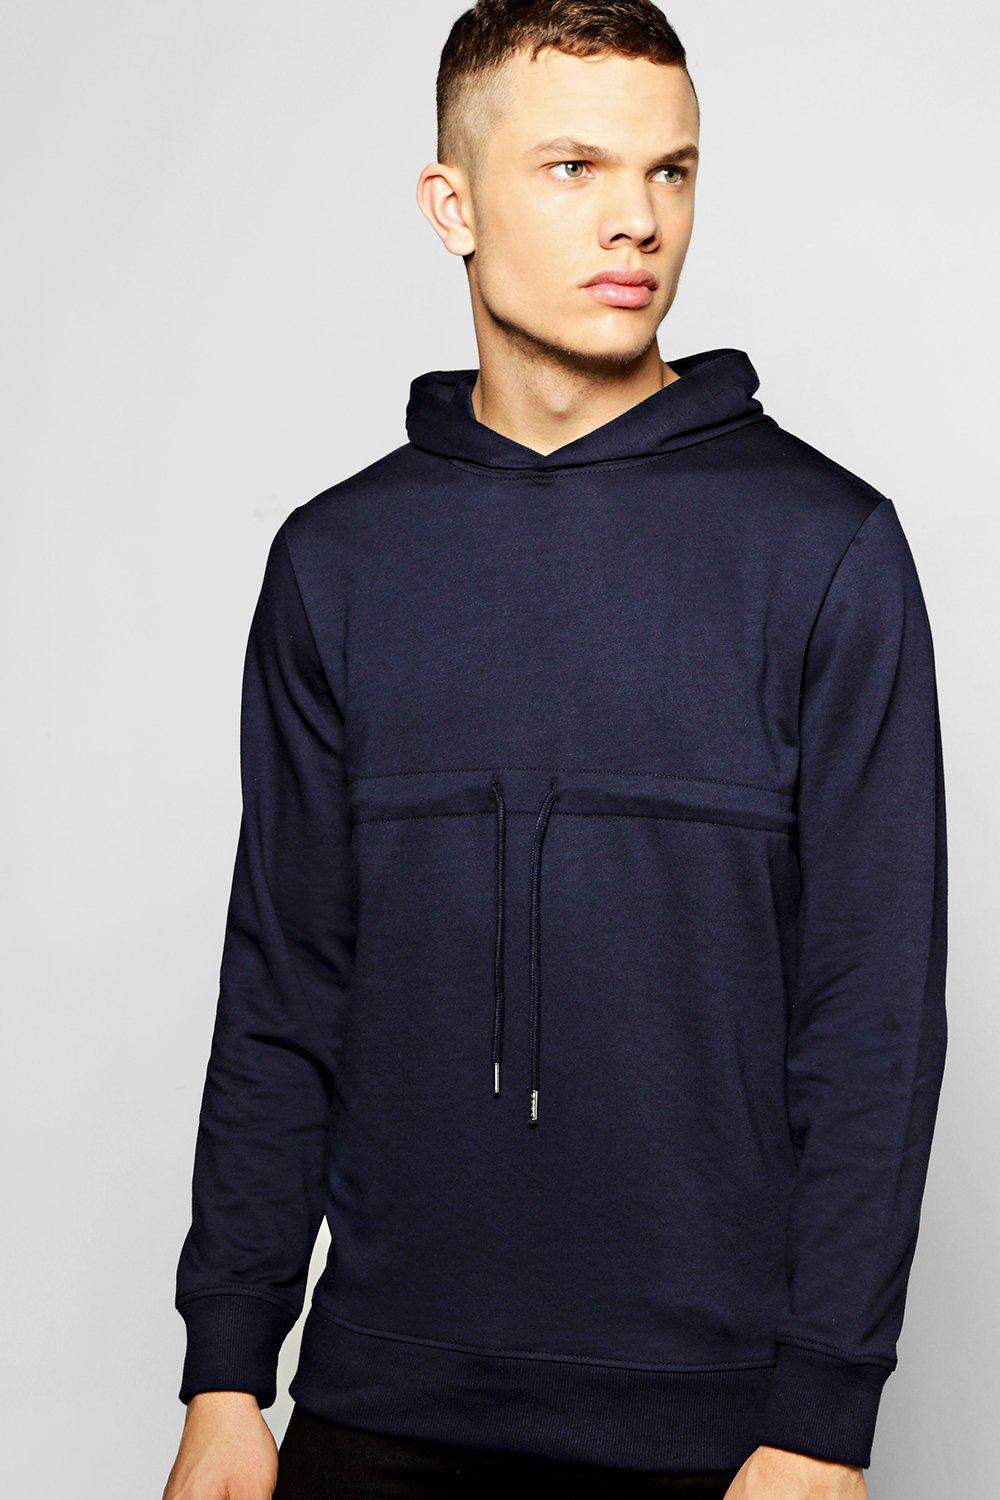 Over the Head Hoodie With Drawcord - boohooMAN